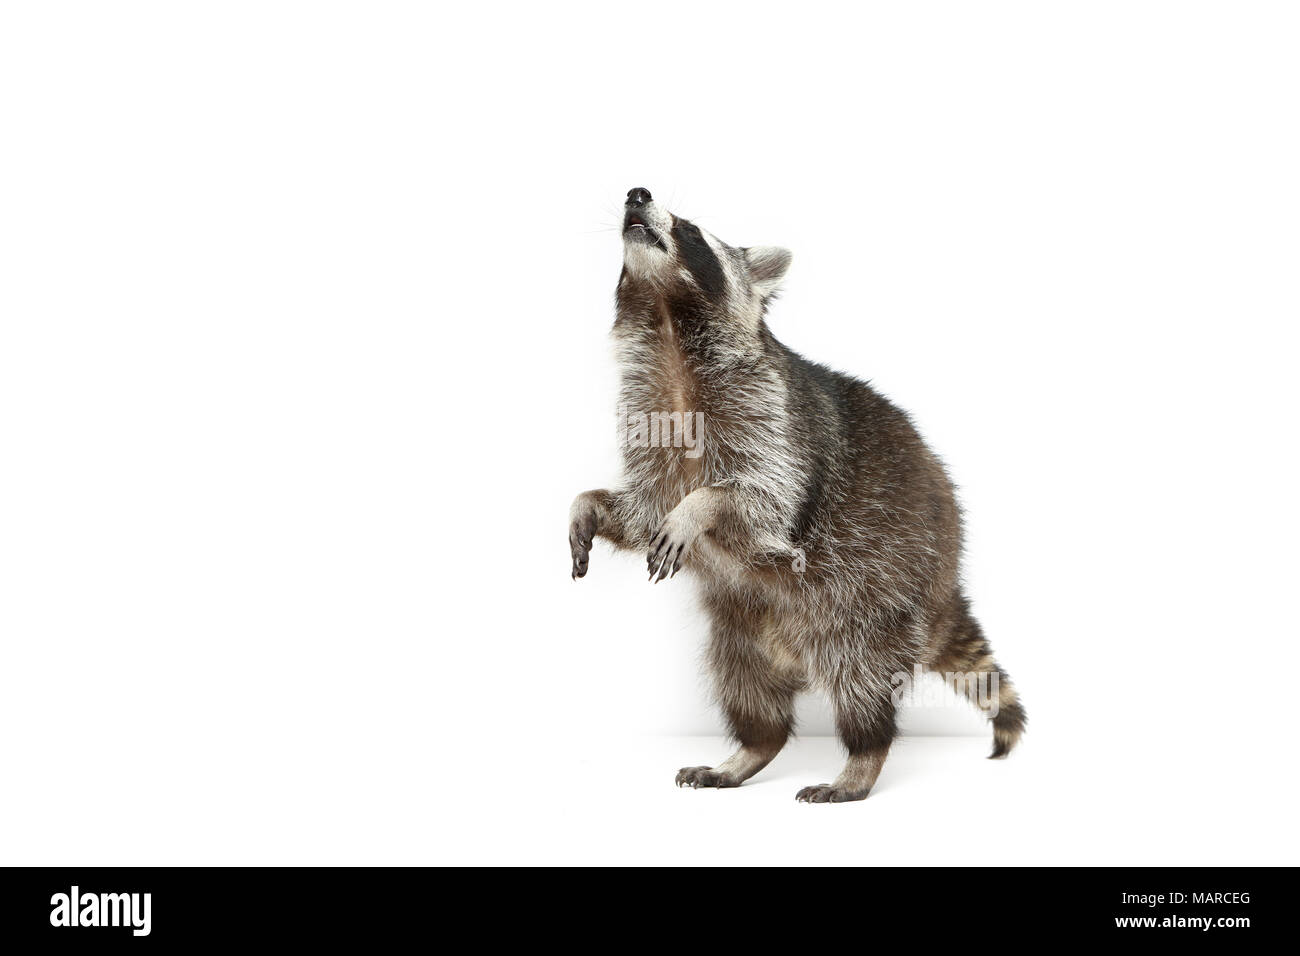 Raccoon (Procyon lotor). Adult standing on its hind legs. Studio picture against a white background. Germany Stock Photo